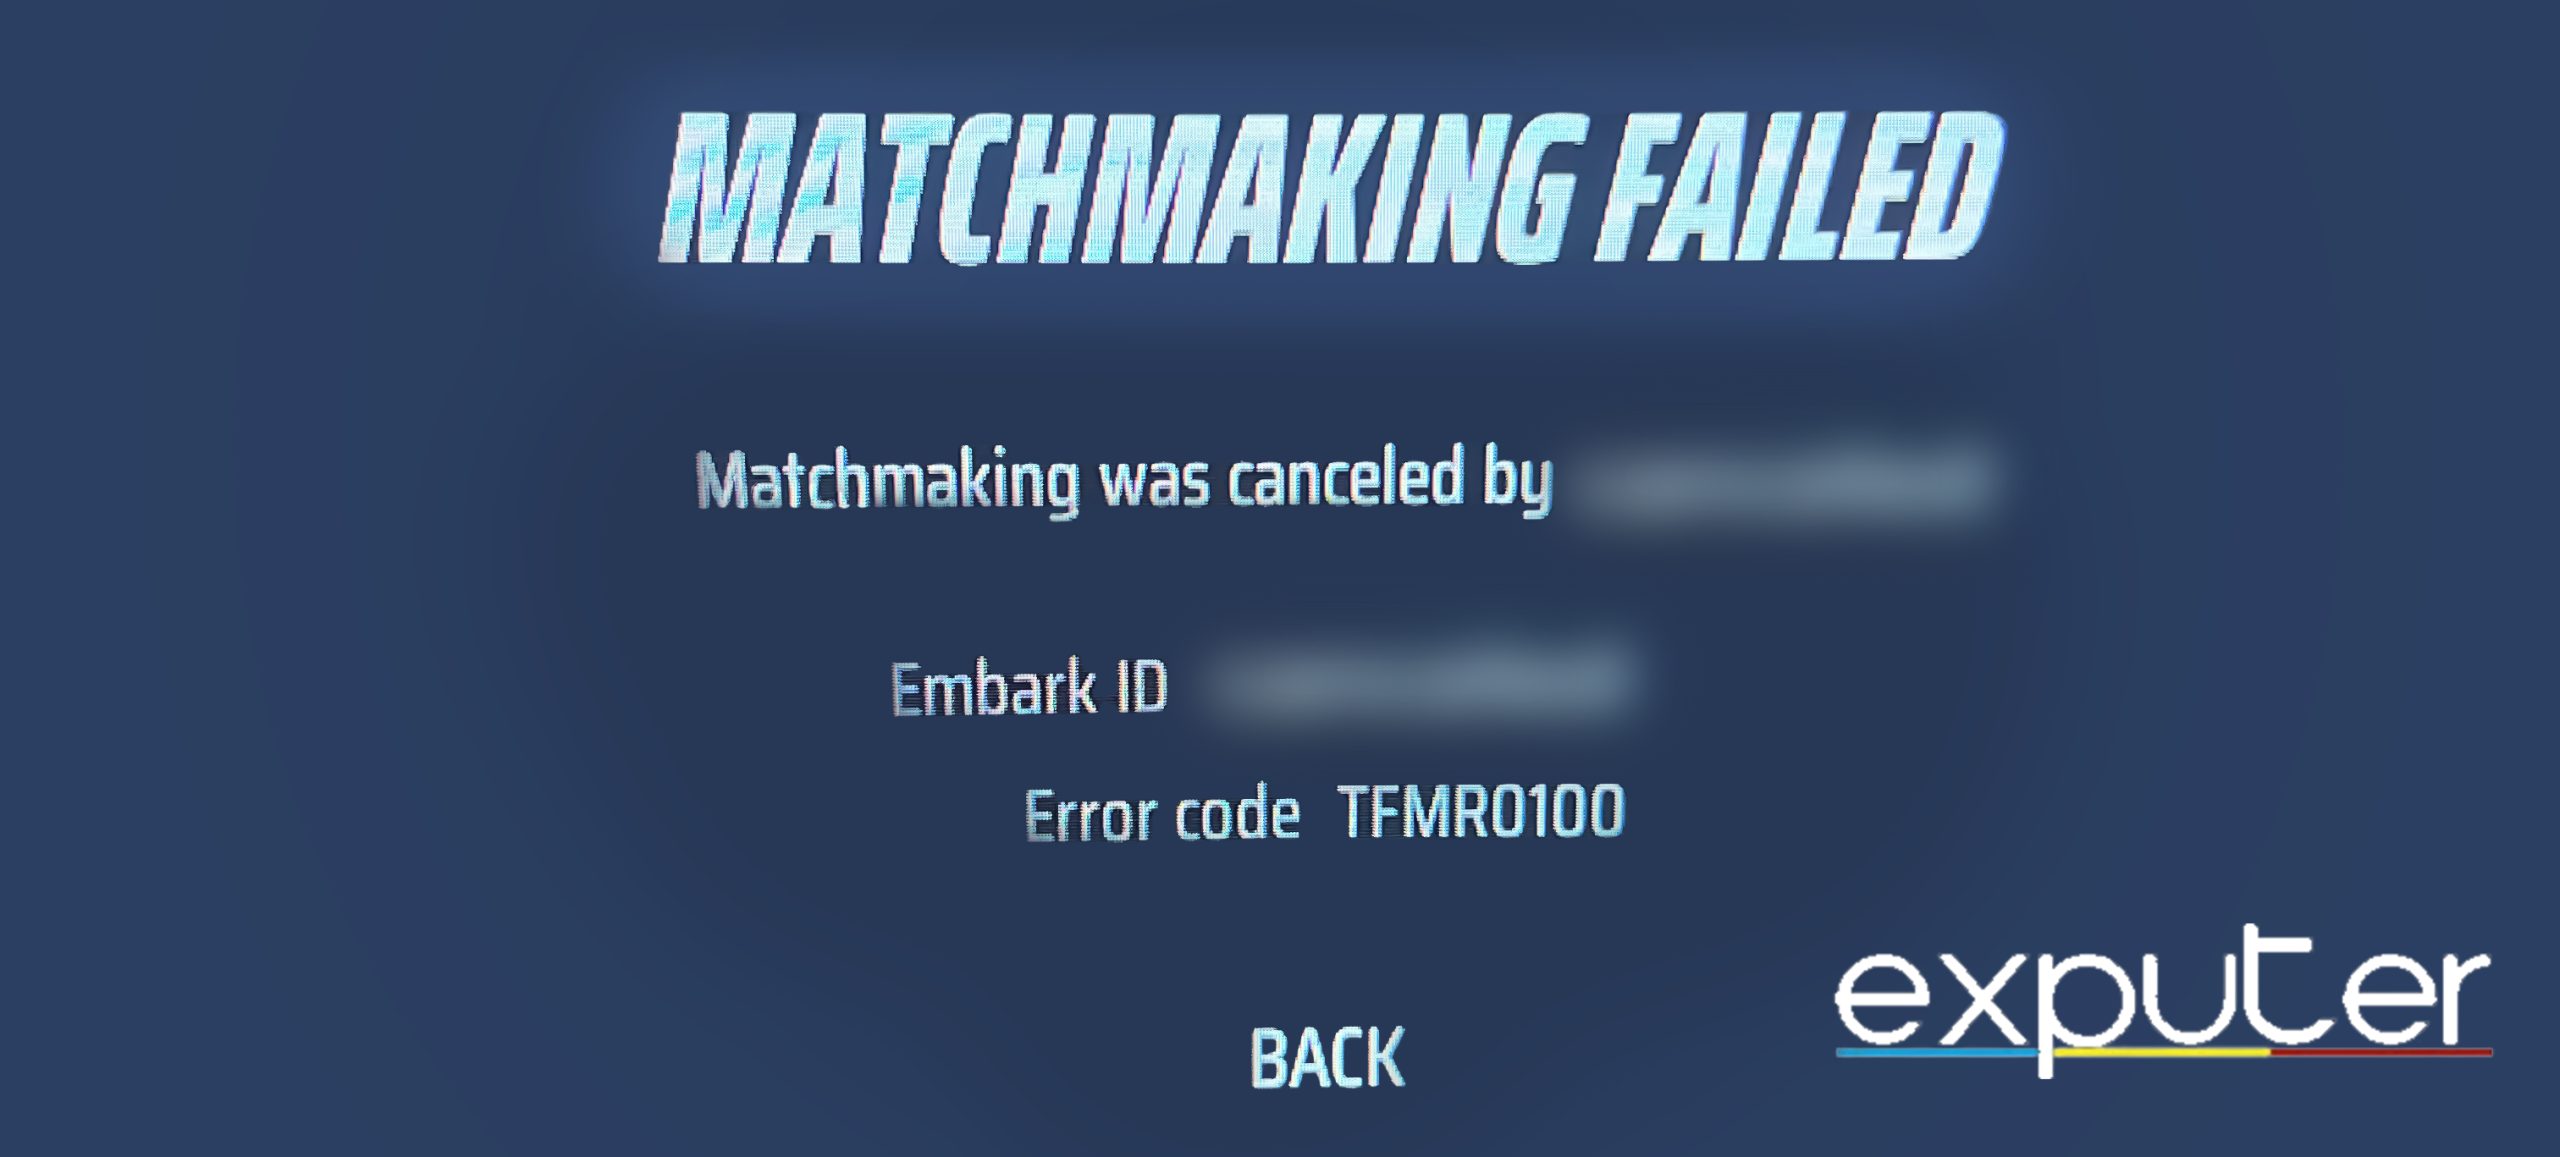 The Finals Matchmaking Error. (image taken by eXputer)